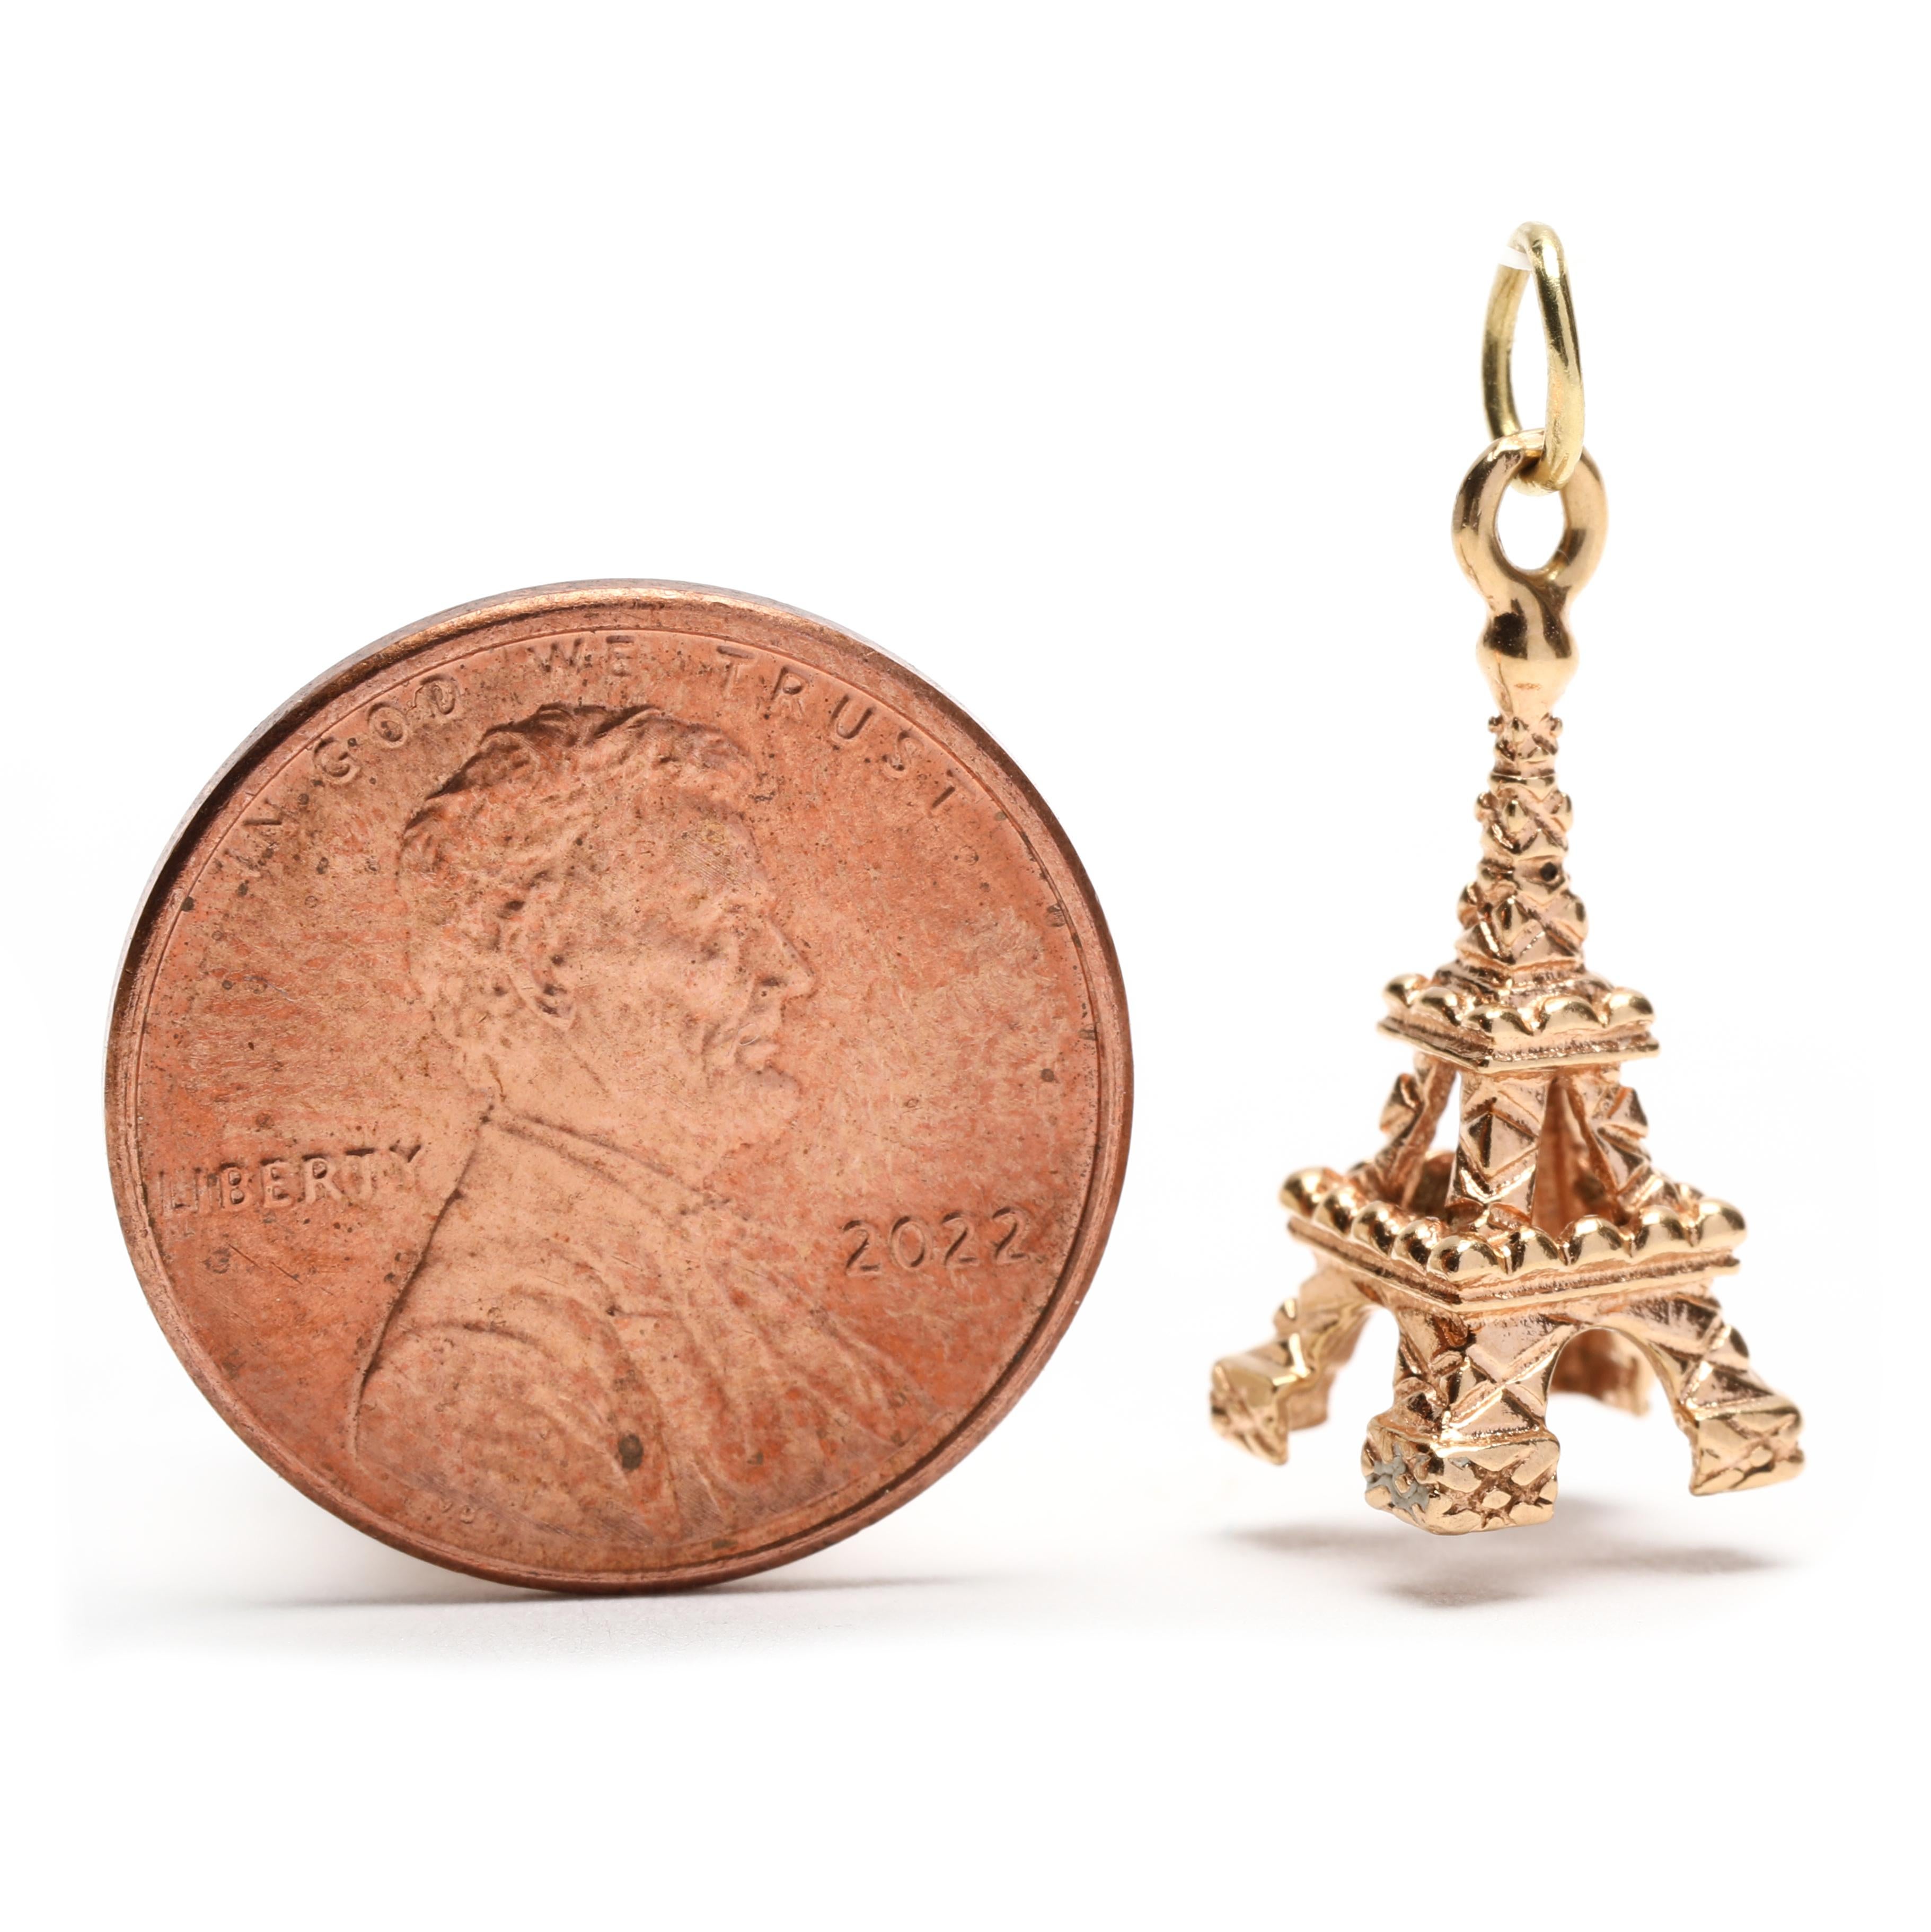 This small gold Eiffel Tower charm is a beautiful and delicate piece of jewelry that will make a great addition to your collection. Crafted from 18K yellow gold, this charming Paris-inspired charm measures 7/8 inch in length and makes a perfect gift